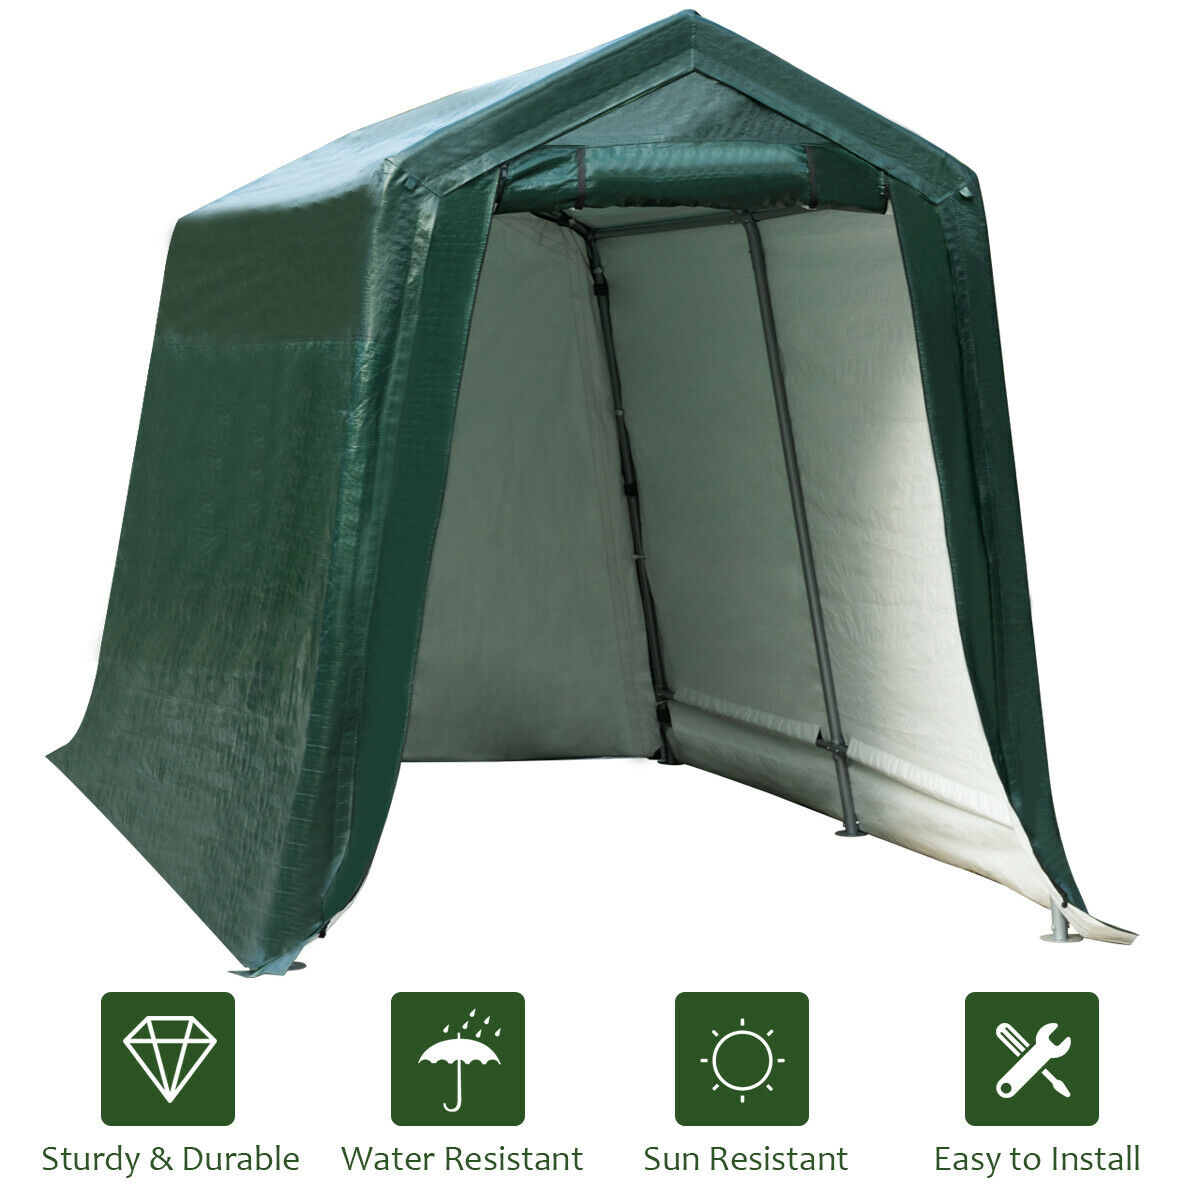 Gymax 7'x12' Patio Tent Carport Storage Shelter Shed Car Canopy Heavy Duty Green